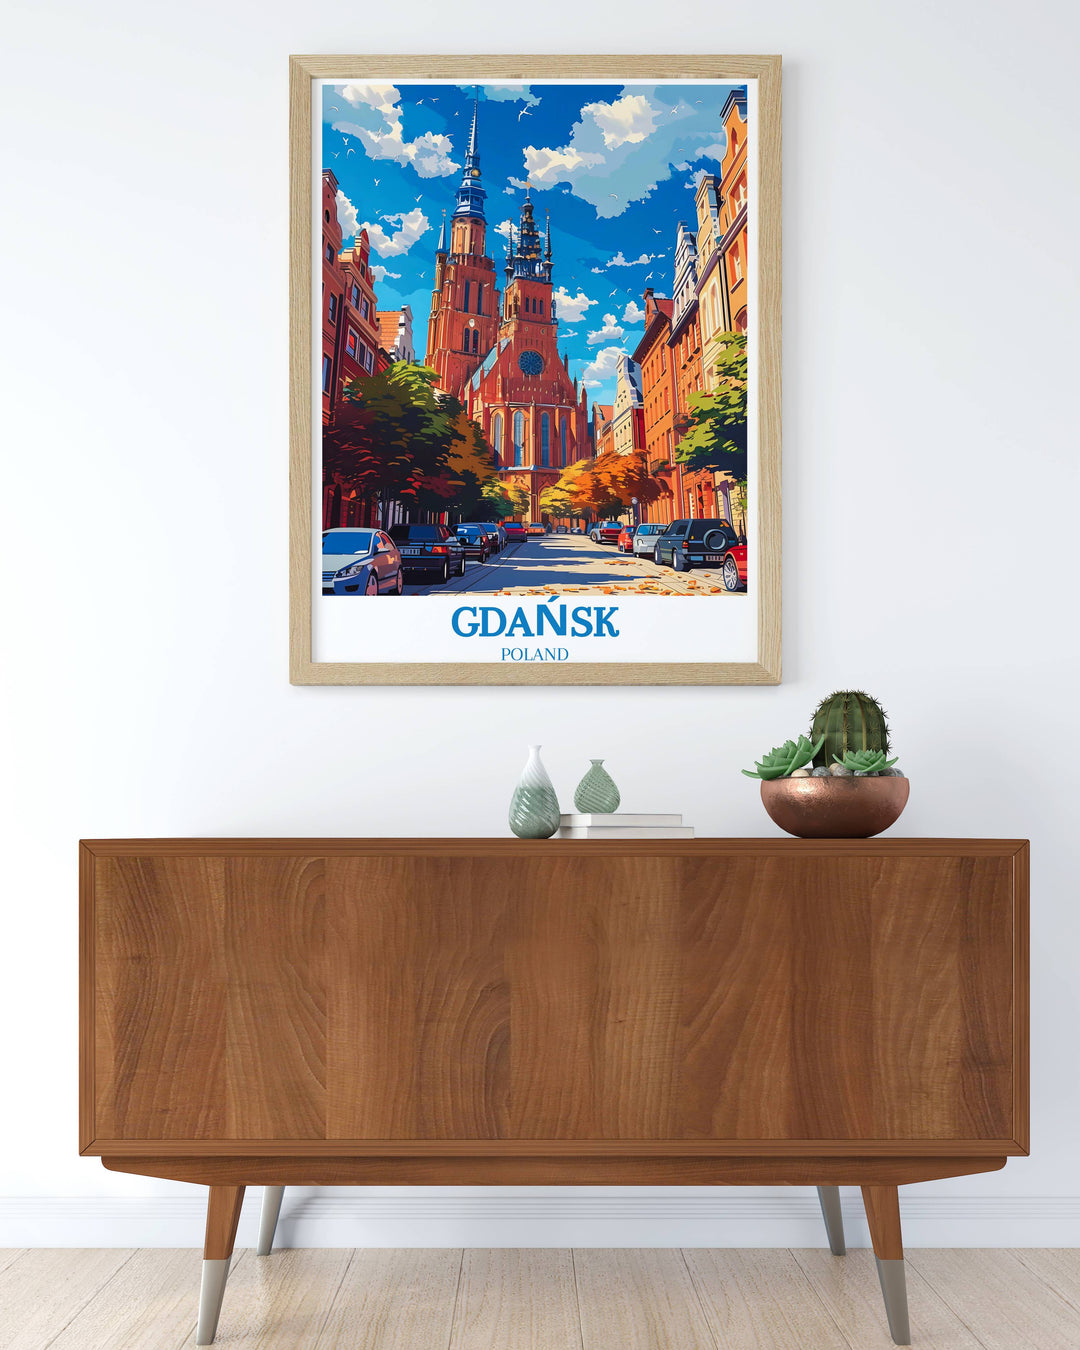 An elegant Gdańsk Wall Decor item that blends traditional and modern elements of Gdańsk, ideal for enhancing the aesthetic appeal of any room.